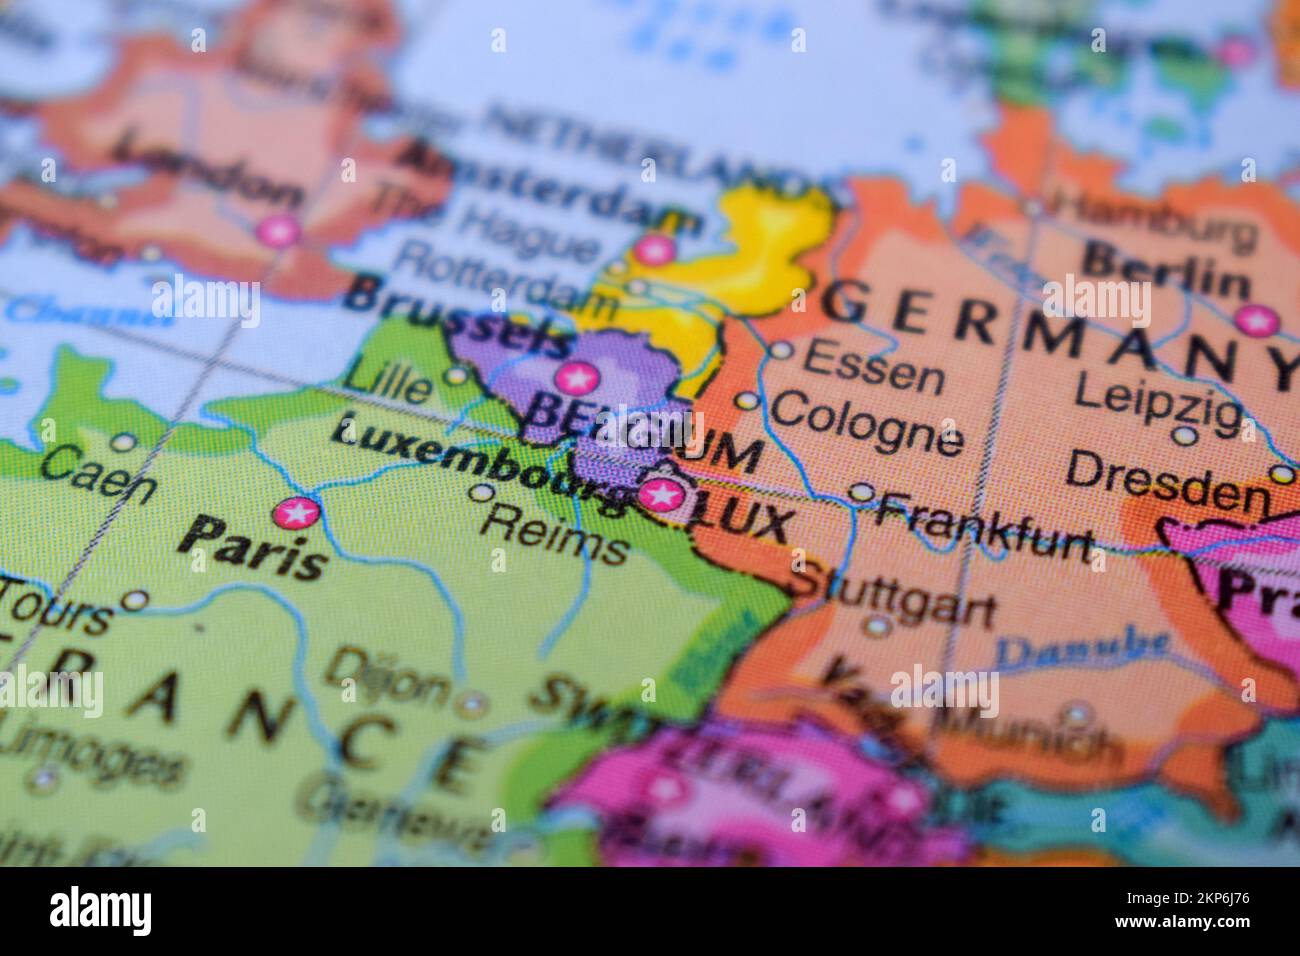 Belgium on The Political Map Travel Concept Macro Close-Up View Stock Photo